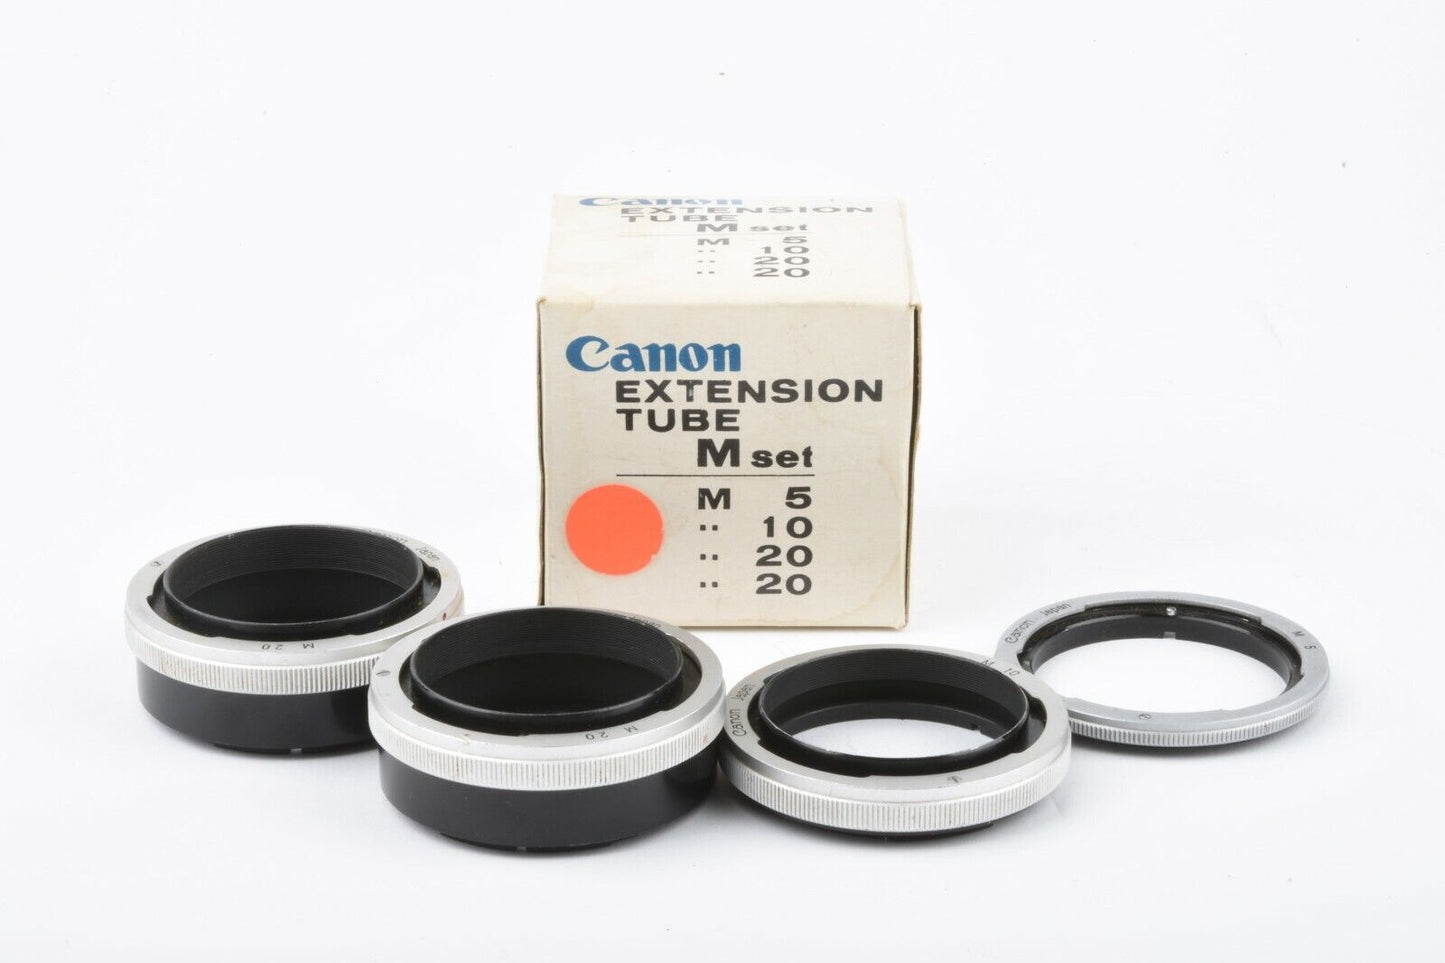 EXC++ CANON EXTENSION TUBE M SET (1X M5, 1X M10, 2X M20 RINGS), CLEAN, BOXED